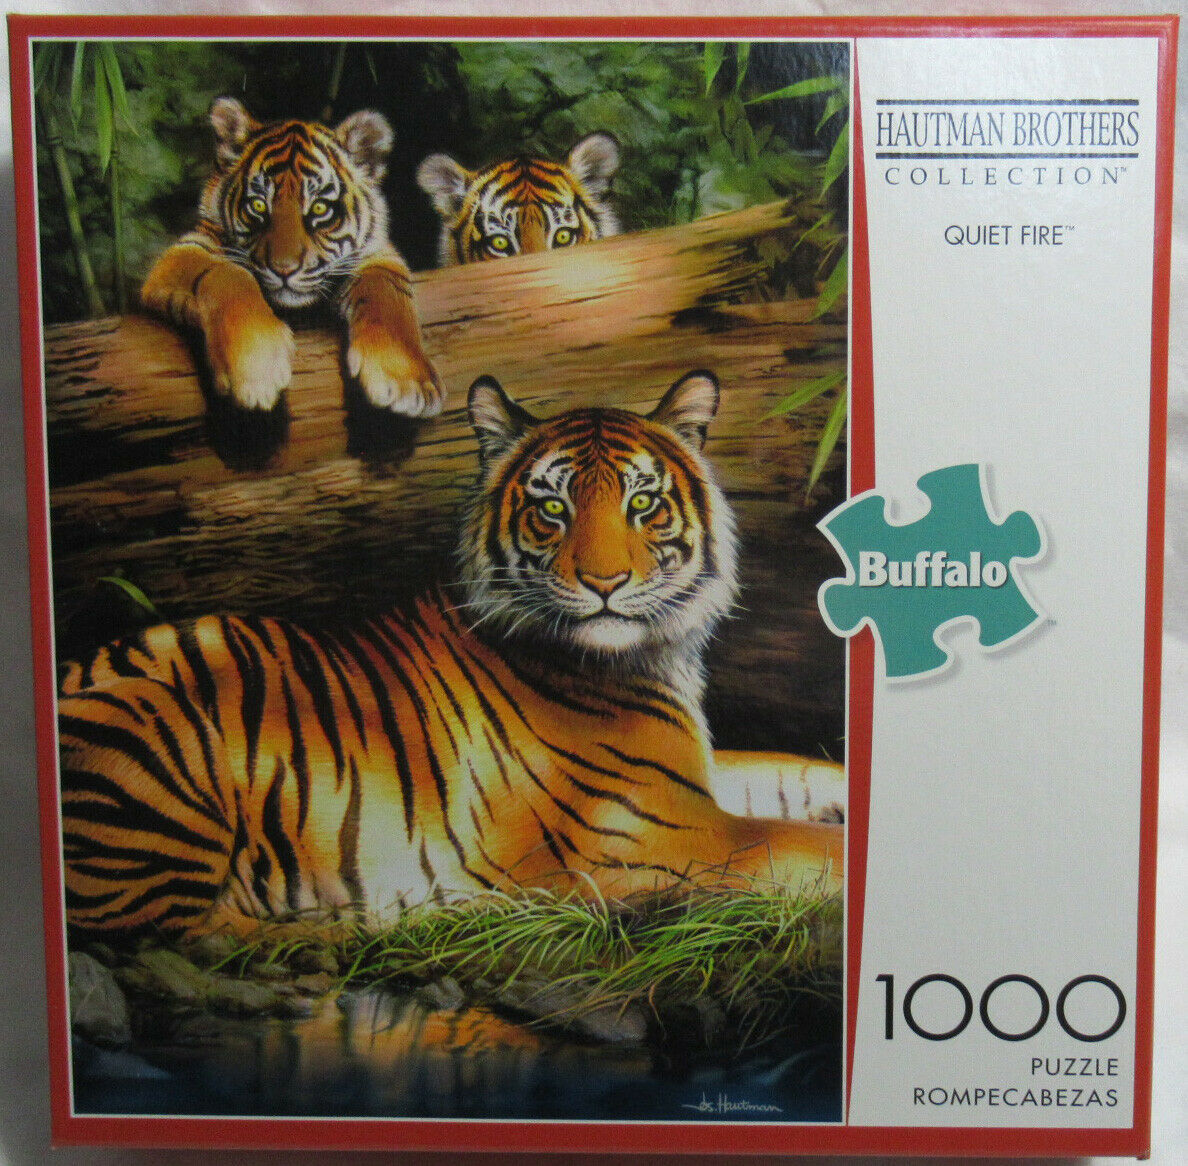 Buffalo 1000 Piece Puzzle Hautman Brothers Collection QUIET FIRE tiger 2 cubs - $37.36